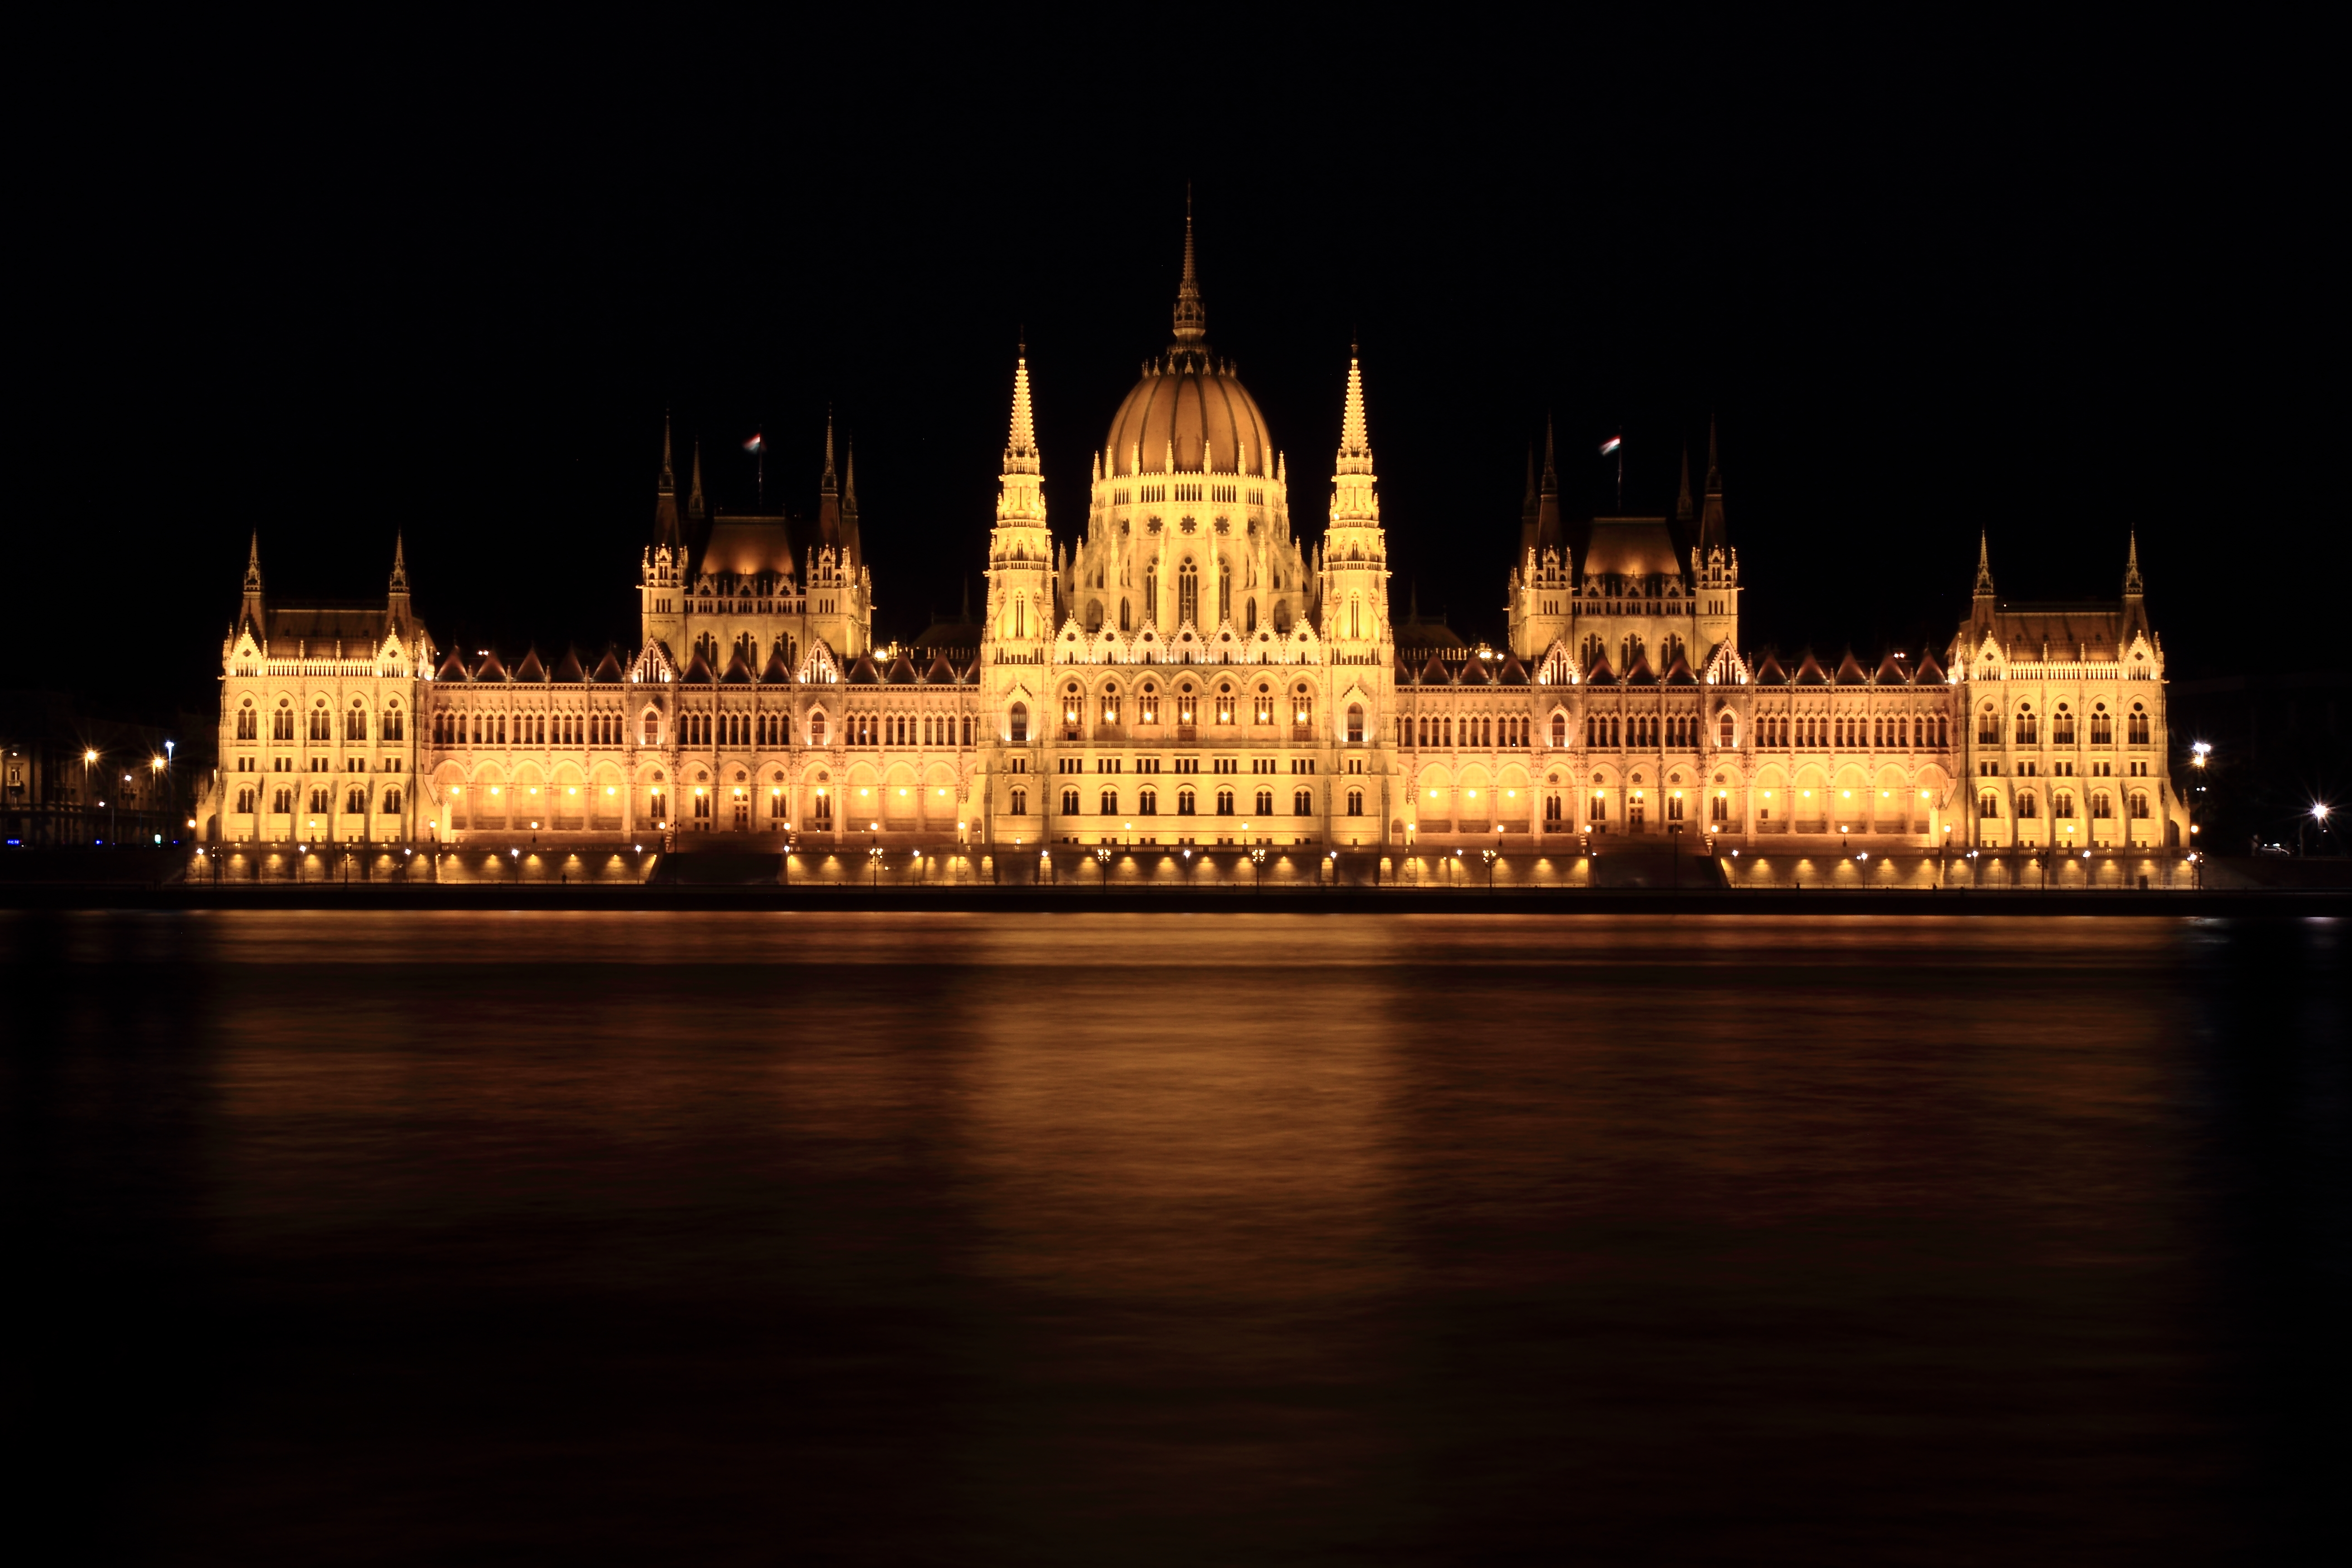 man made, hungarian parliament building, architecture, budapest, danube, hungary, night, monuments HD wallpaper